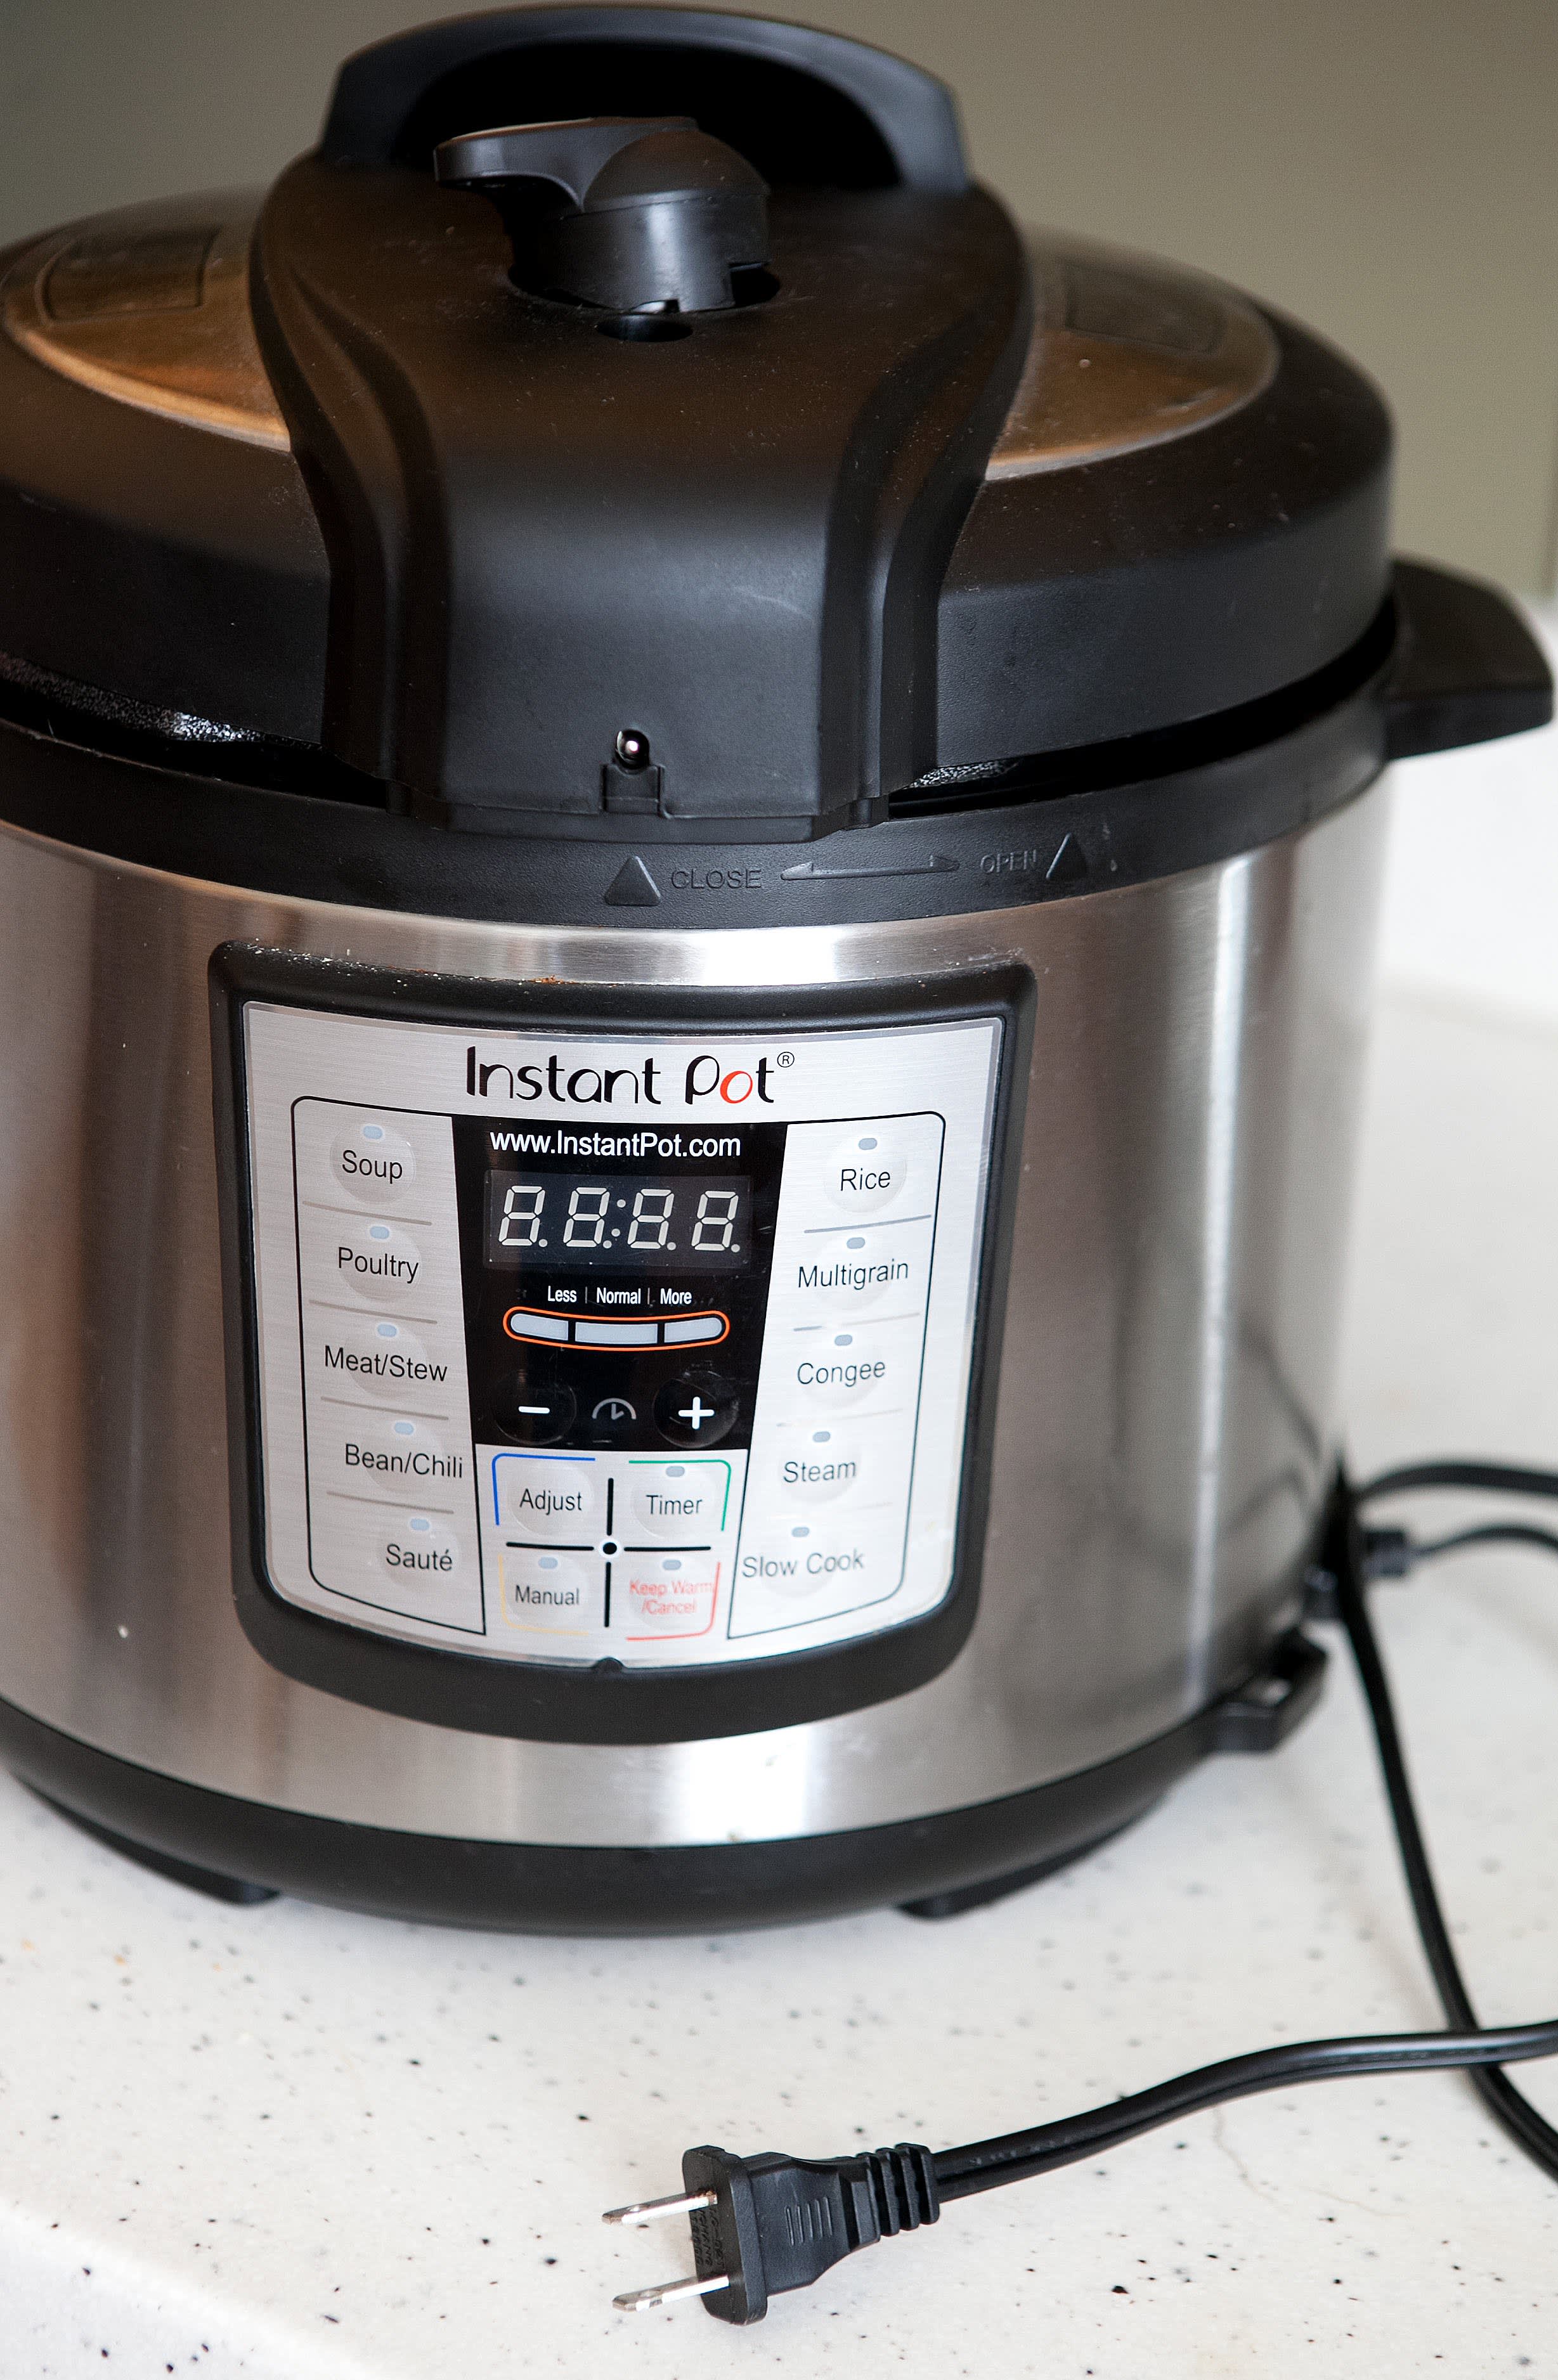 How to Clean & Care for Your Instant Pot